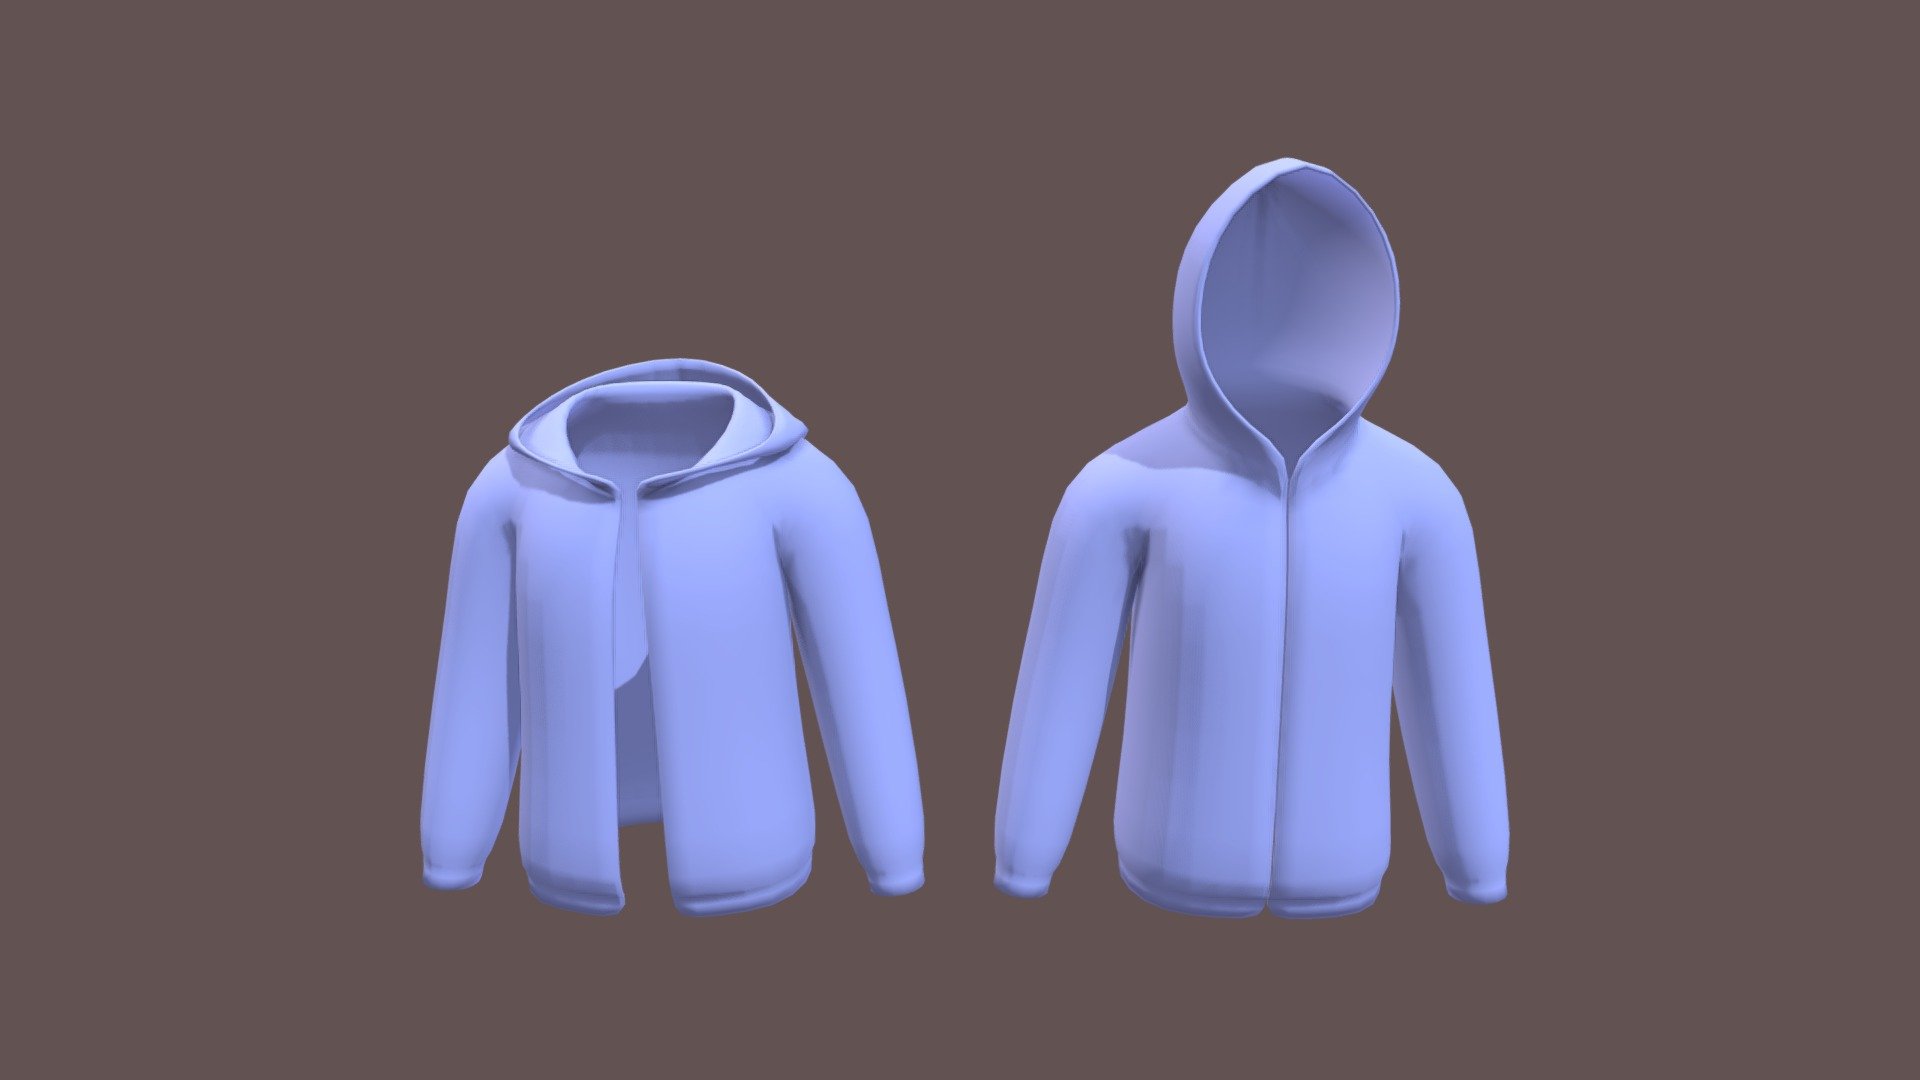 This is a zip-up hoodie 3d object - Zip-up Hoodie#1 - 3D model by AG_ 3d model